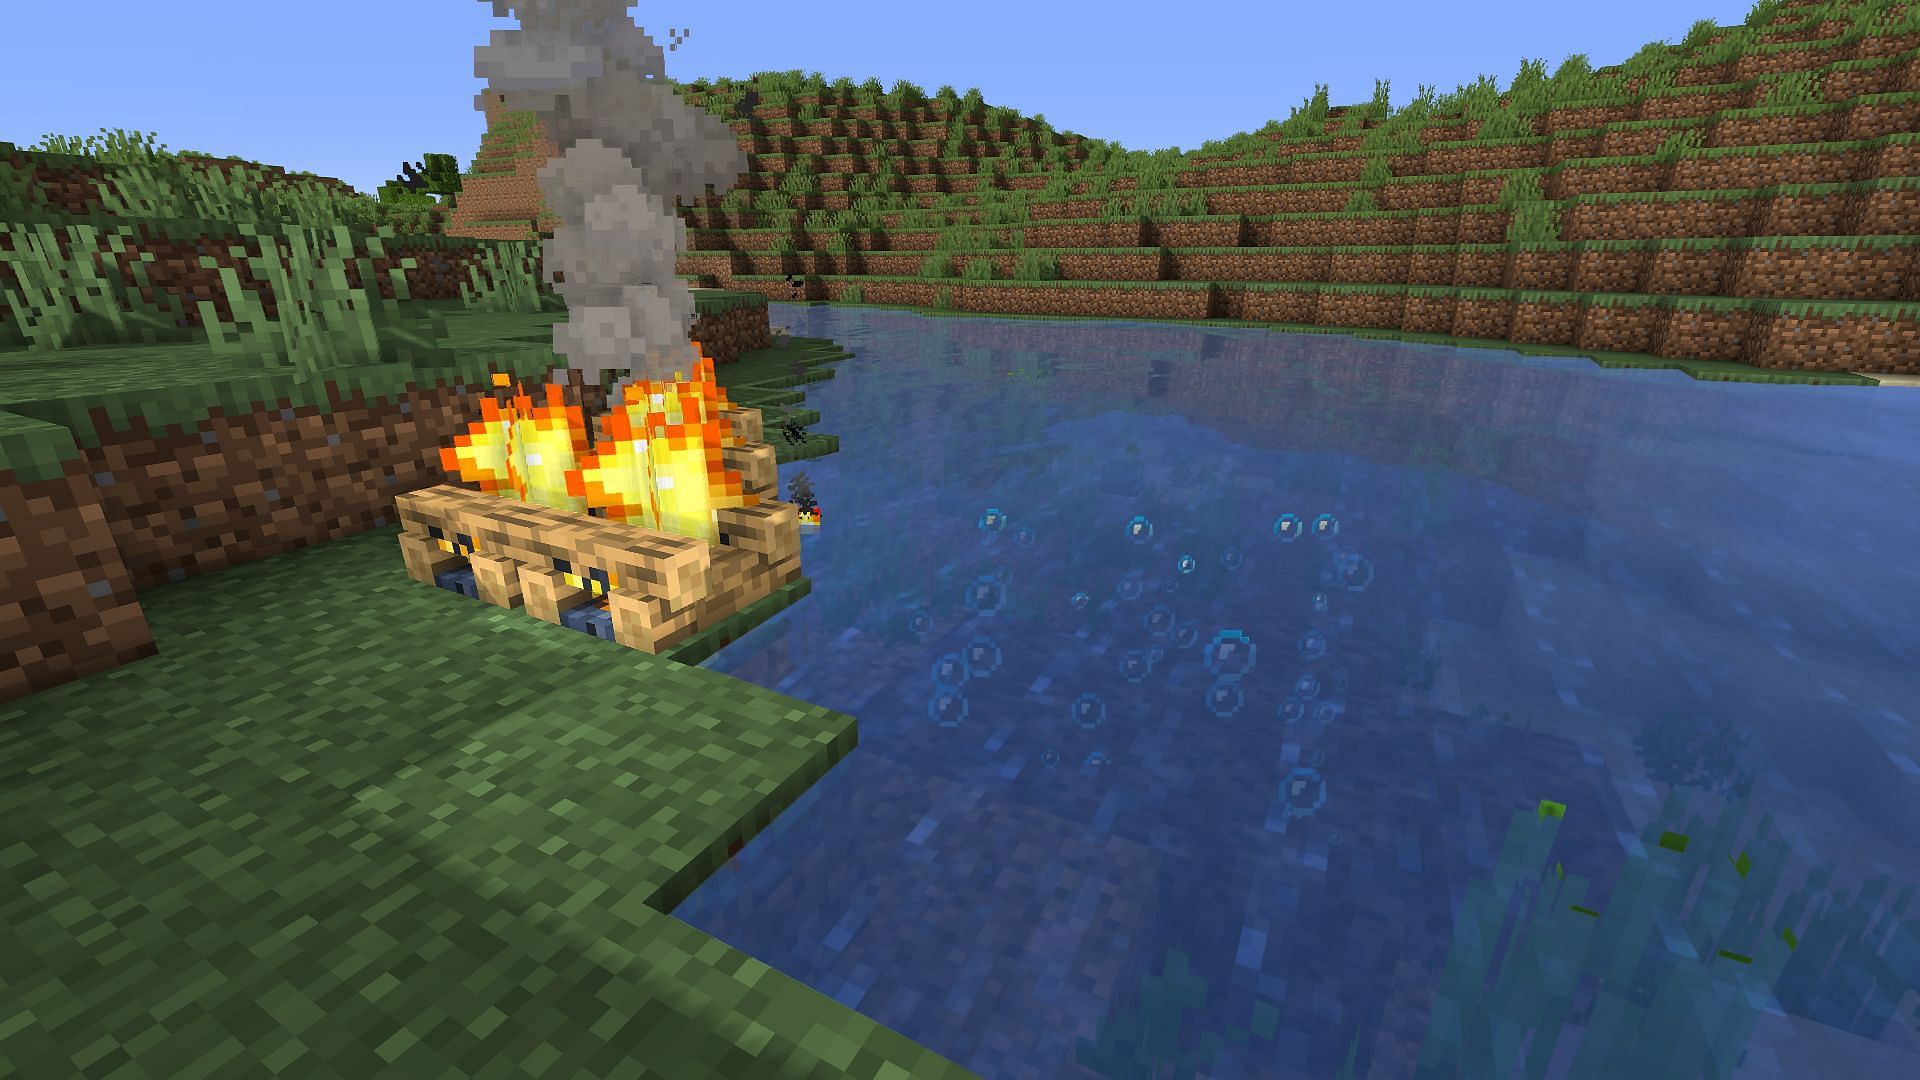 Smoke and bubbles, the two effects which sell the hot tub aesthetic (Image via Minecraft)